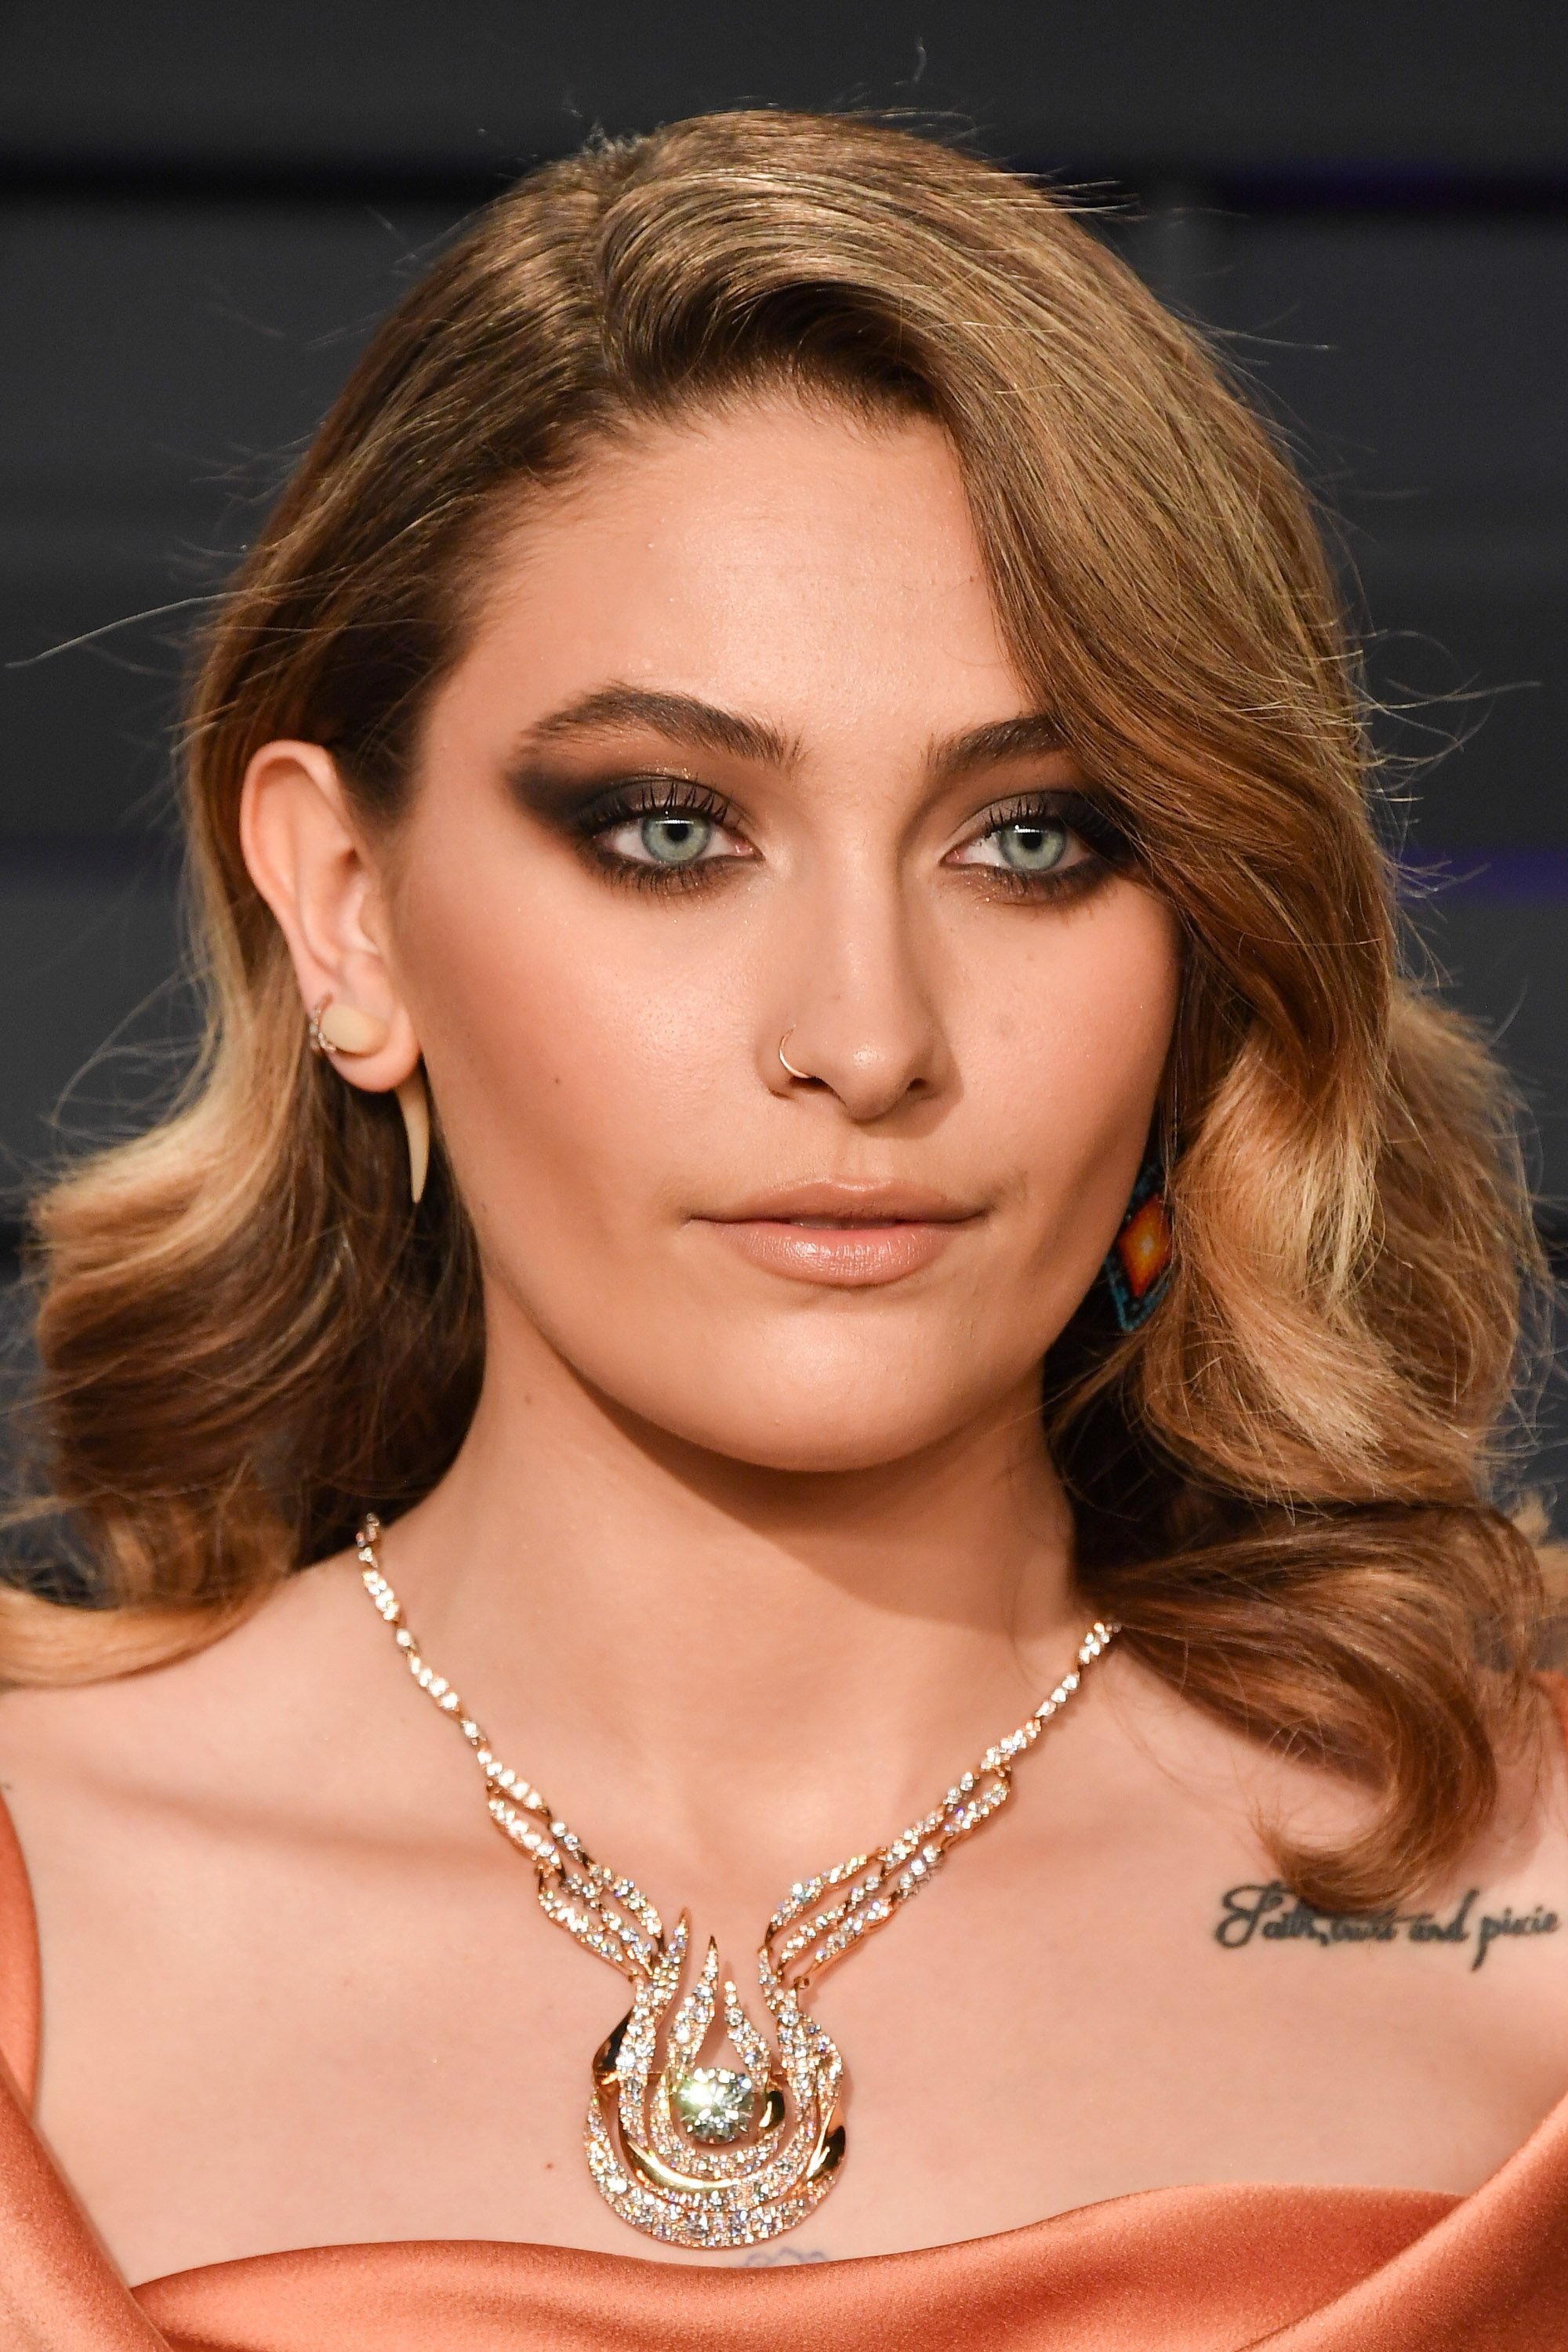 Paris Jackson attends the 2019 Vanity Fair Oscar Party at Wallis Annenberg Center on February 24, 2019 | Photo: Getty Images